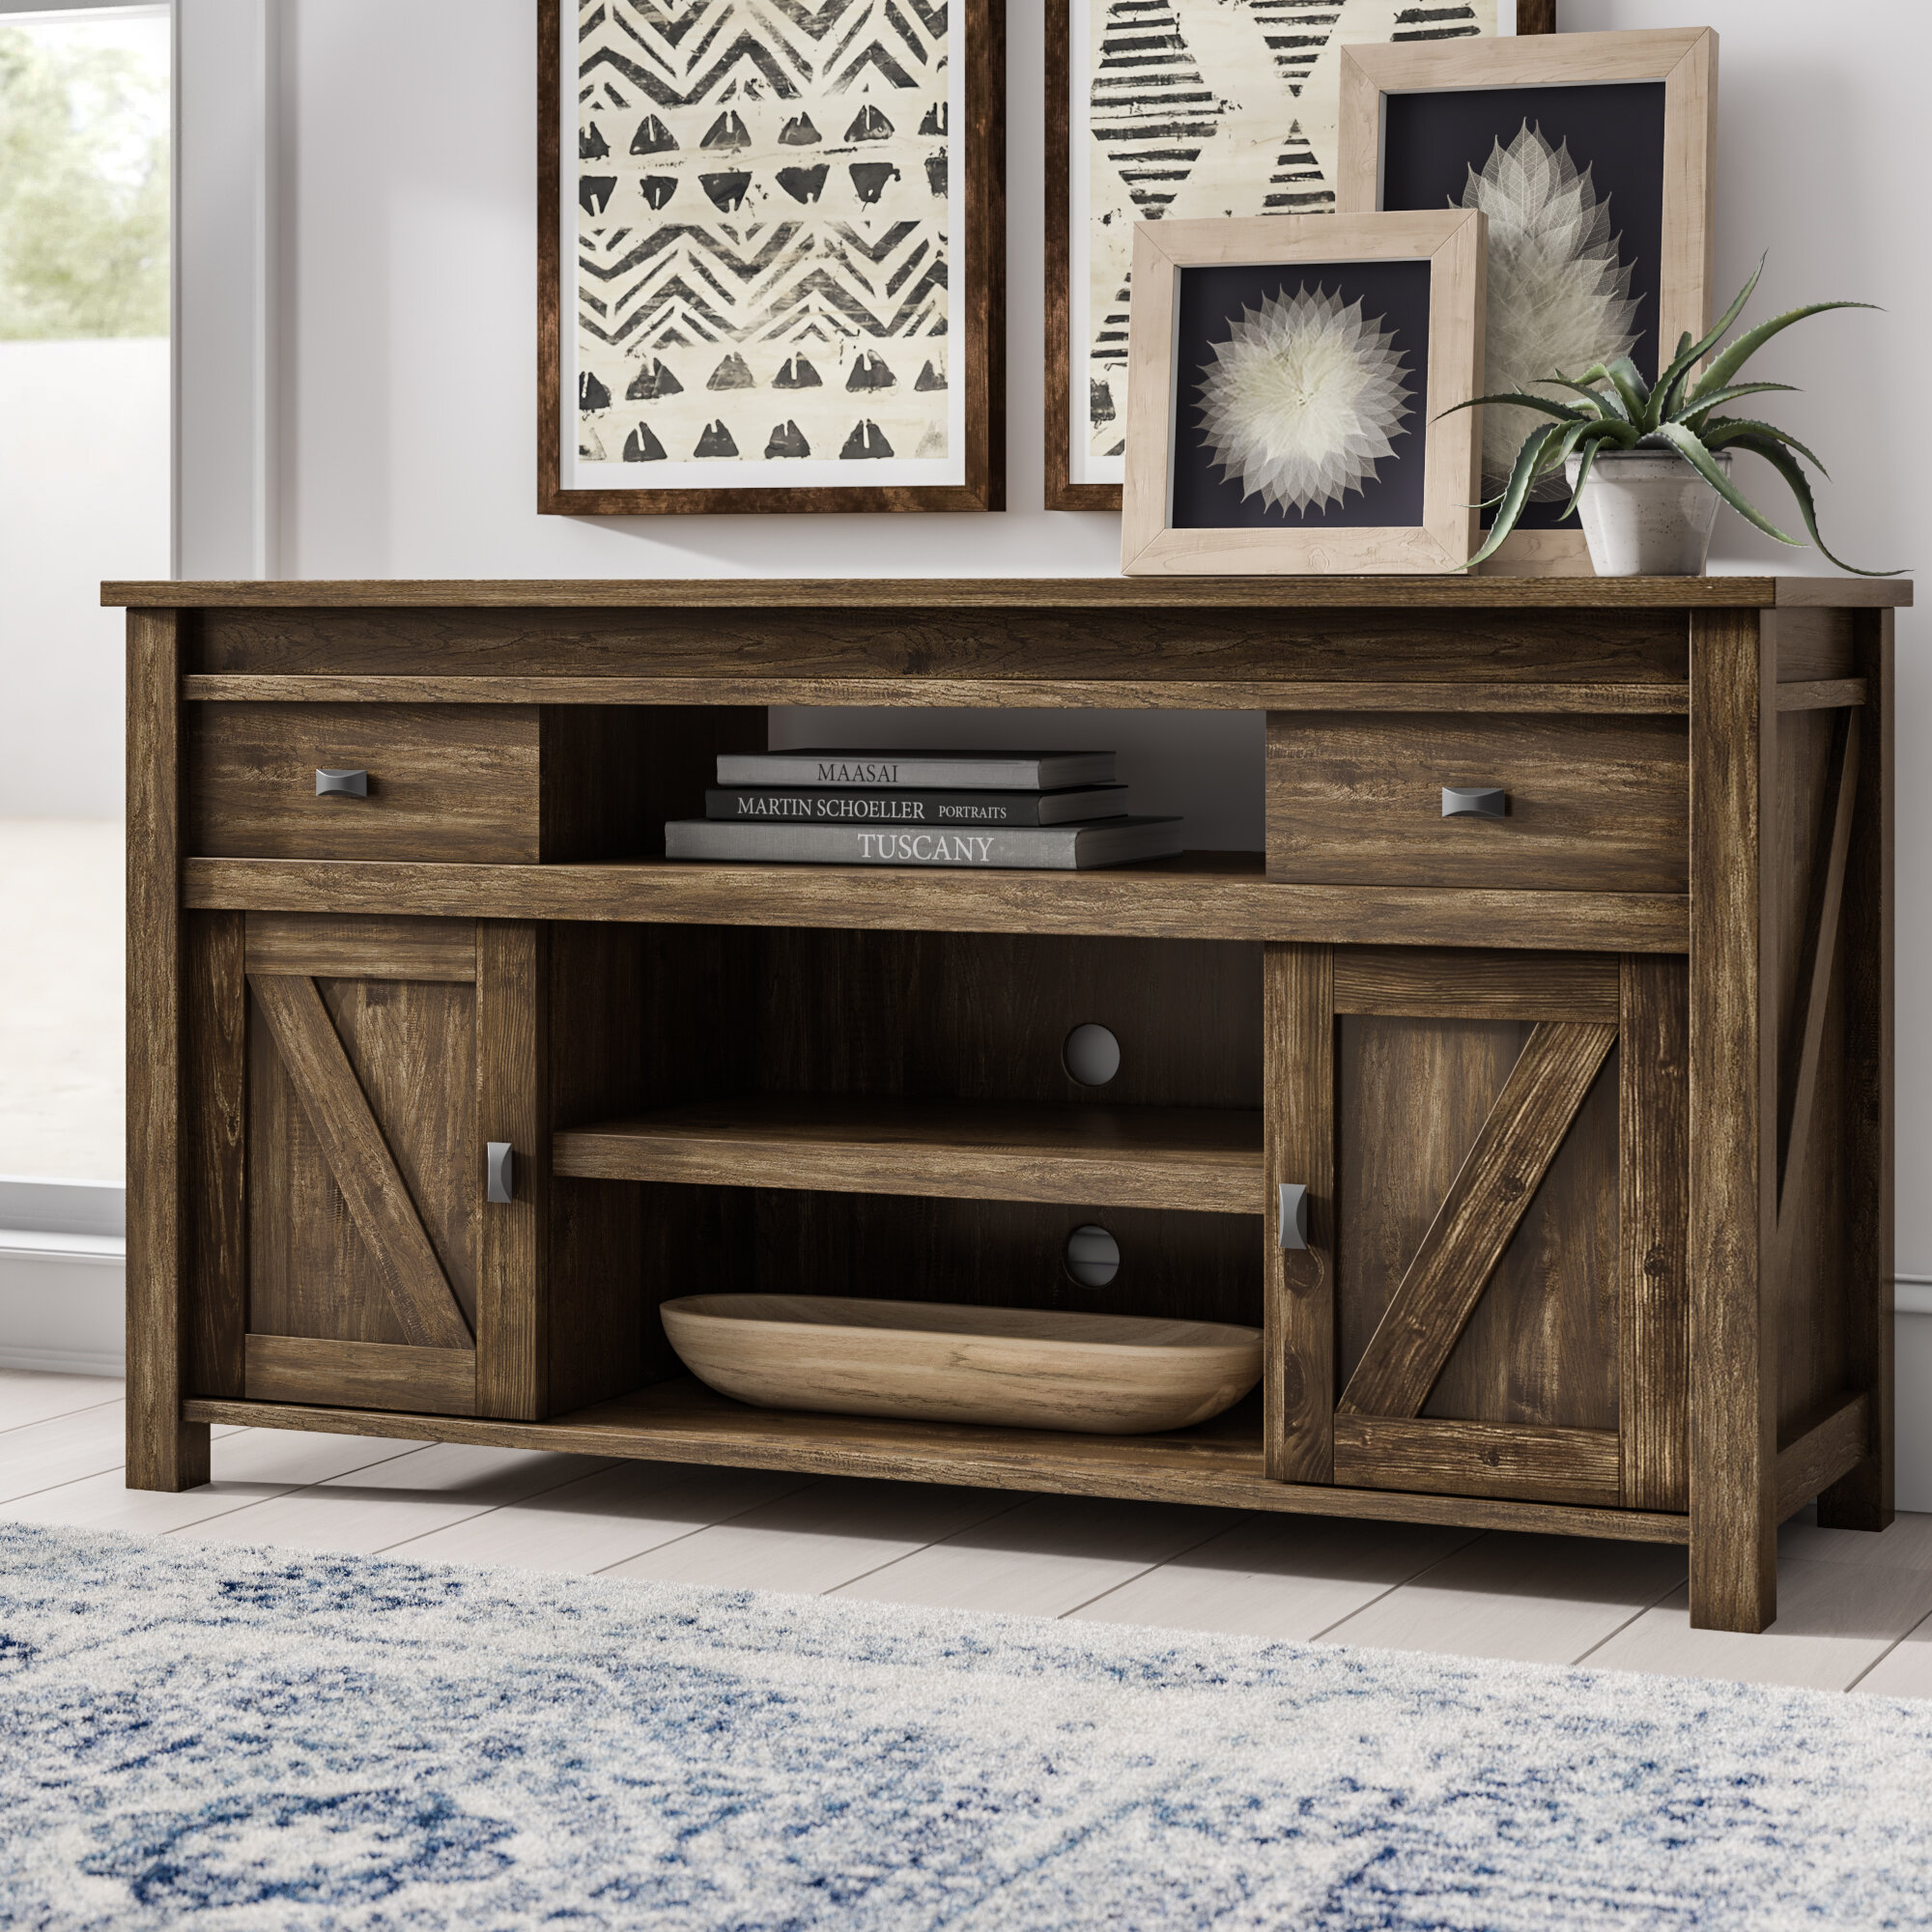 Mistana Whittier Tv Stand For Tvs Up To 60 Reviews Wayfair